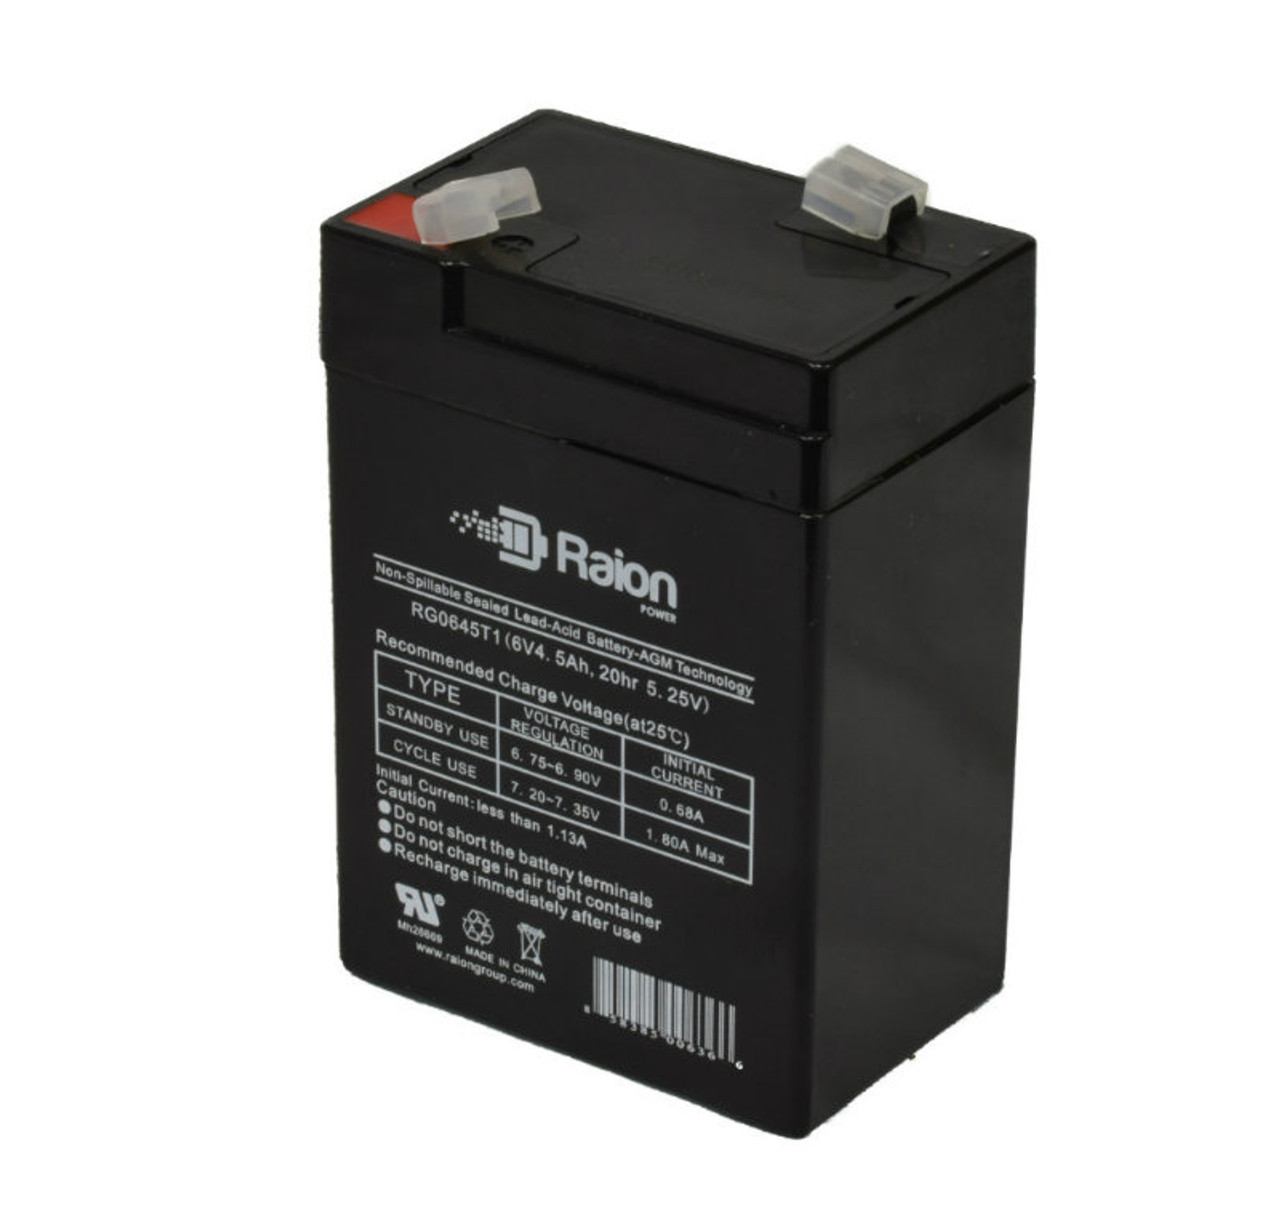 Raion Power RG0645T1 6V 4.5Ah Replacement Ride-On Toy Battery for Best Choice Products SKY4271 Mercedes-Benz G65 - Black